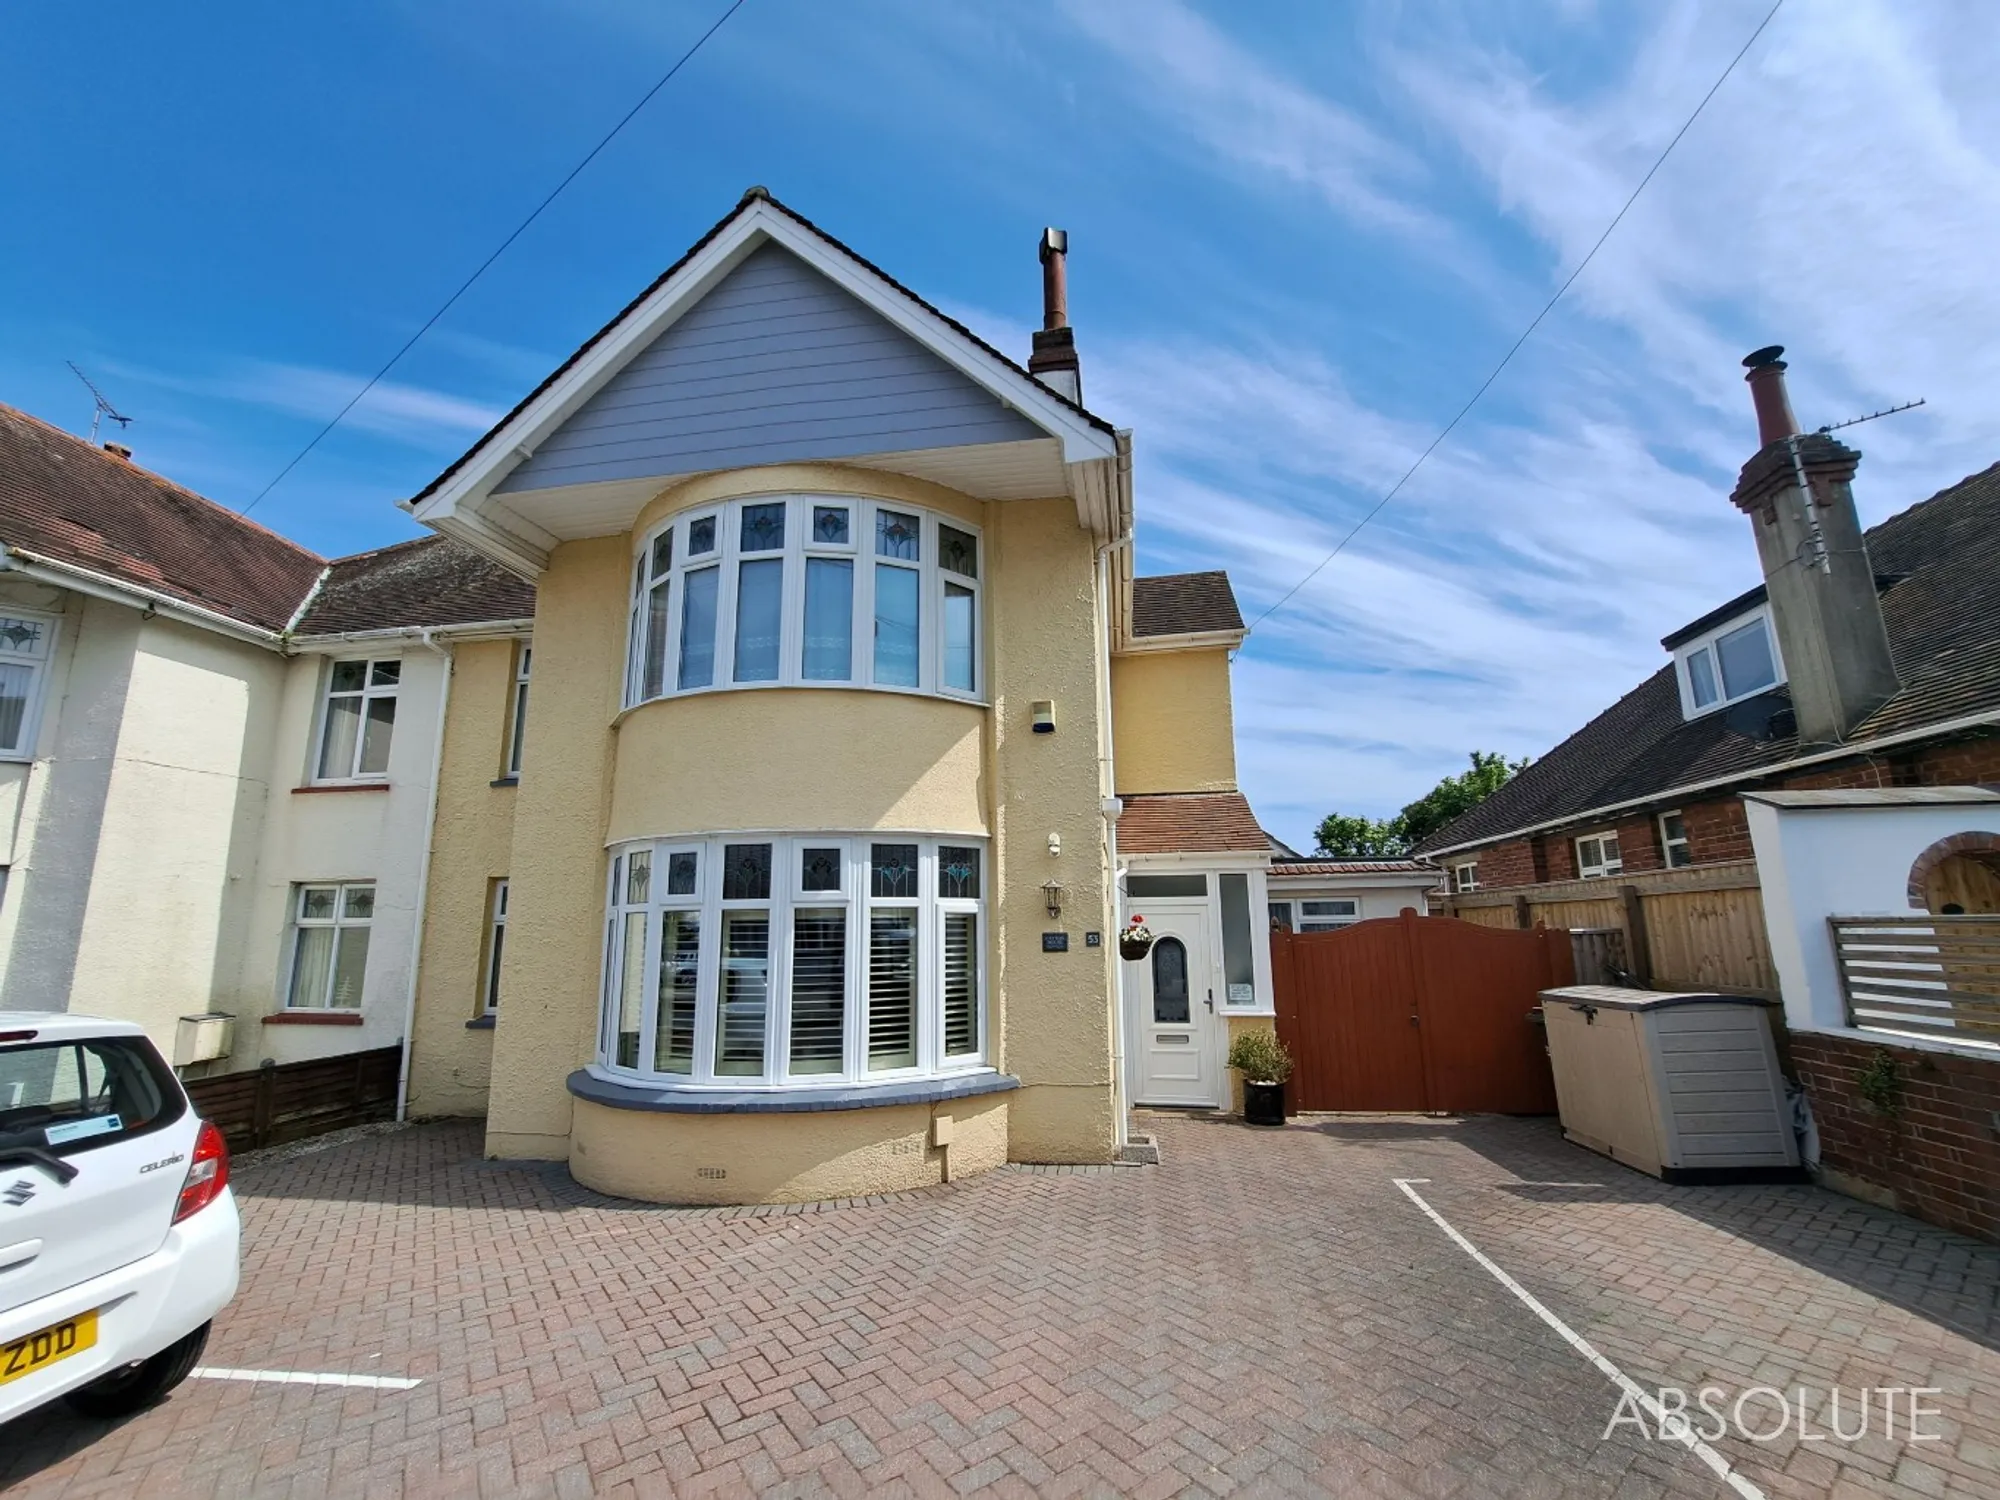 5 bed semi-detached house for sale in Upper Morin Road, Paignton - Property Image 1